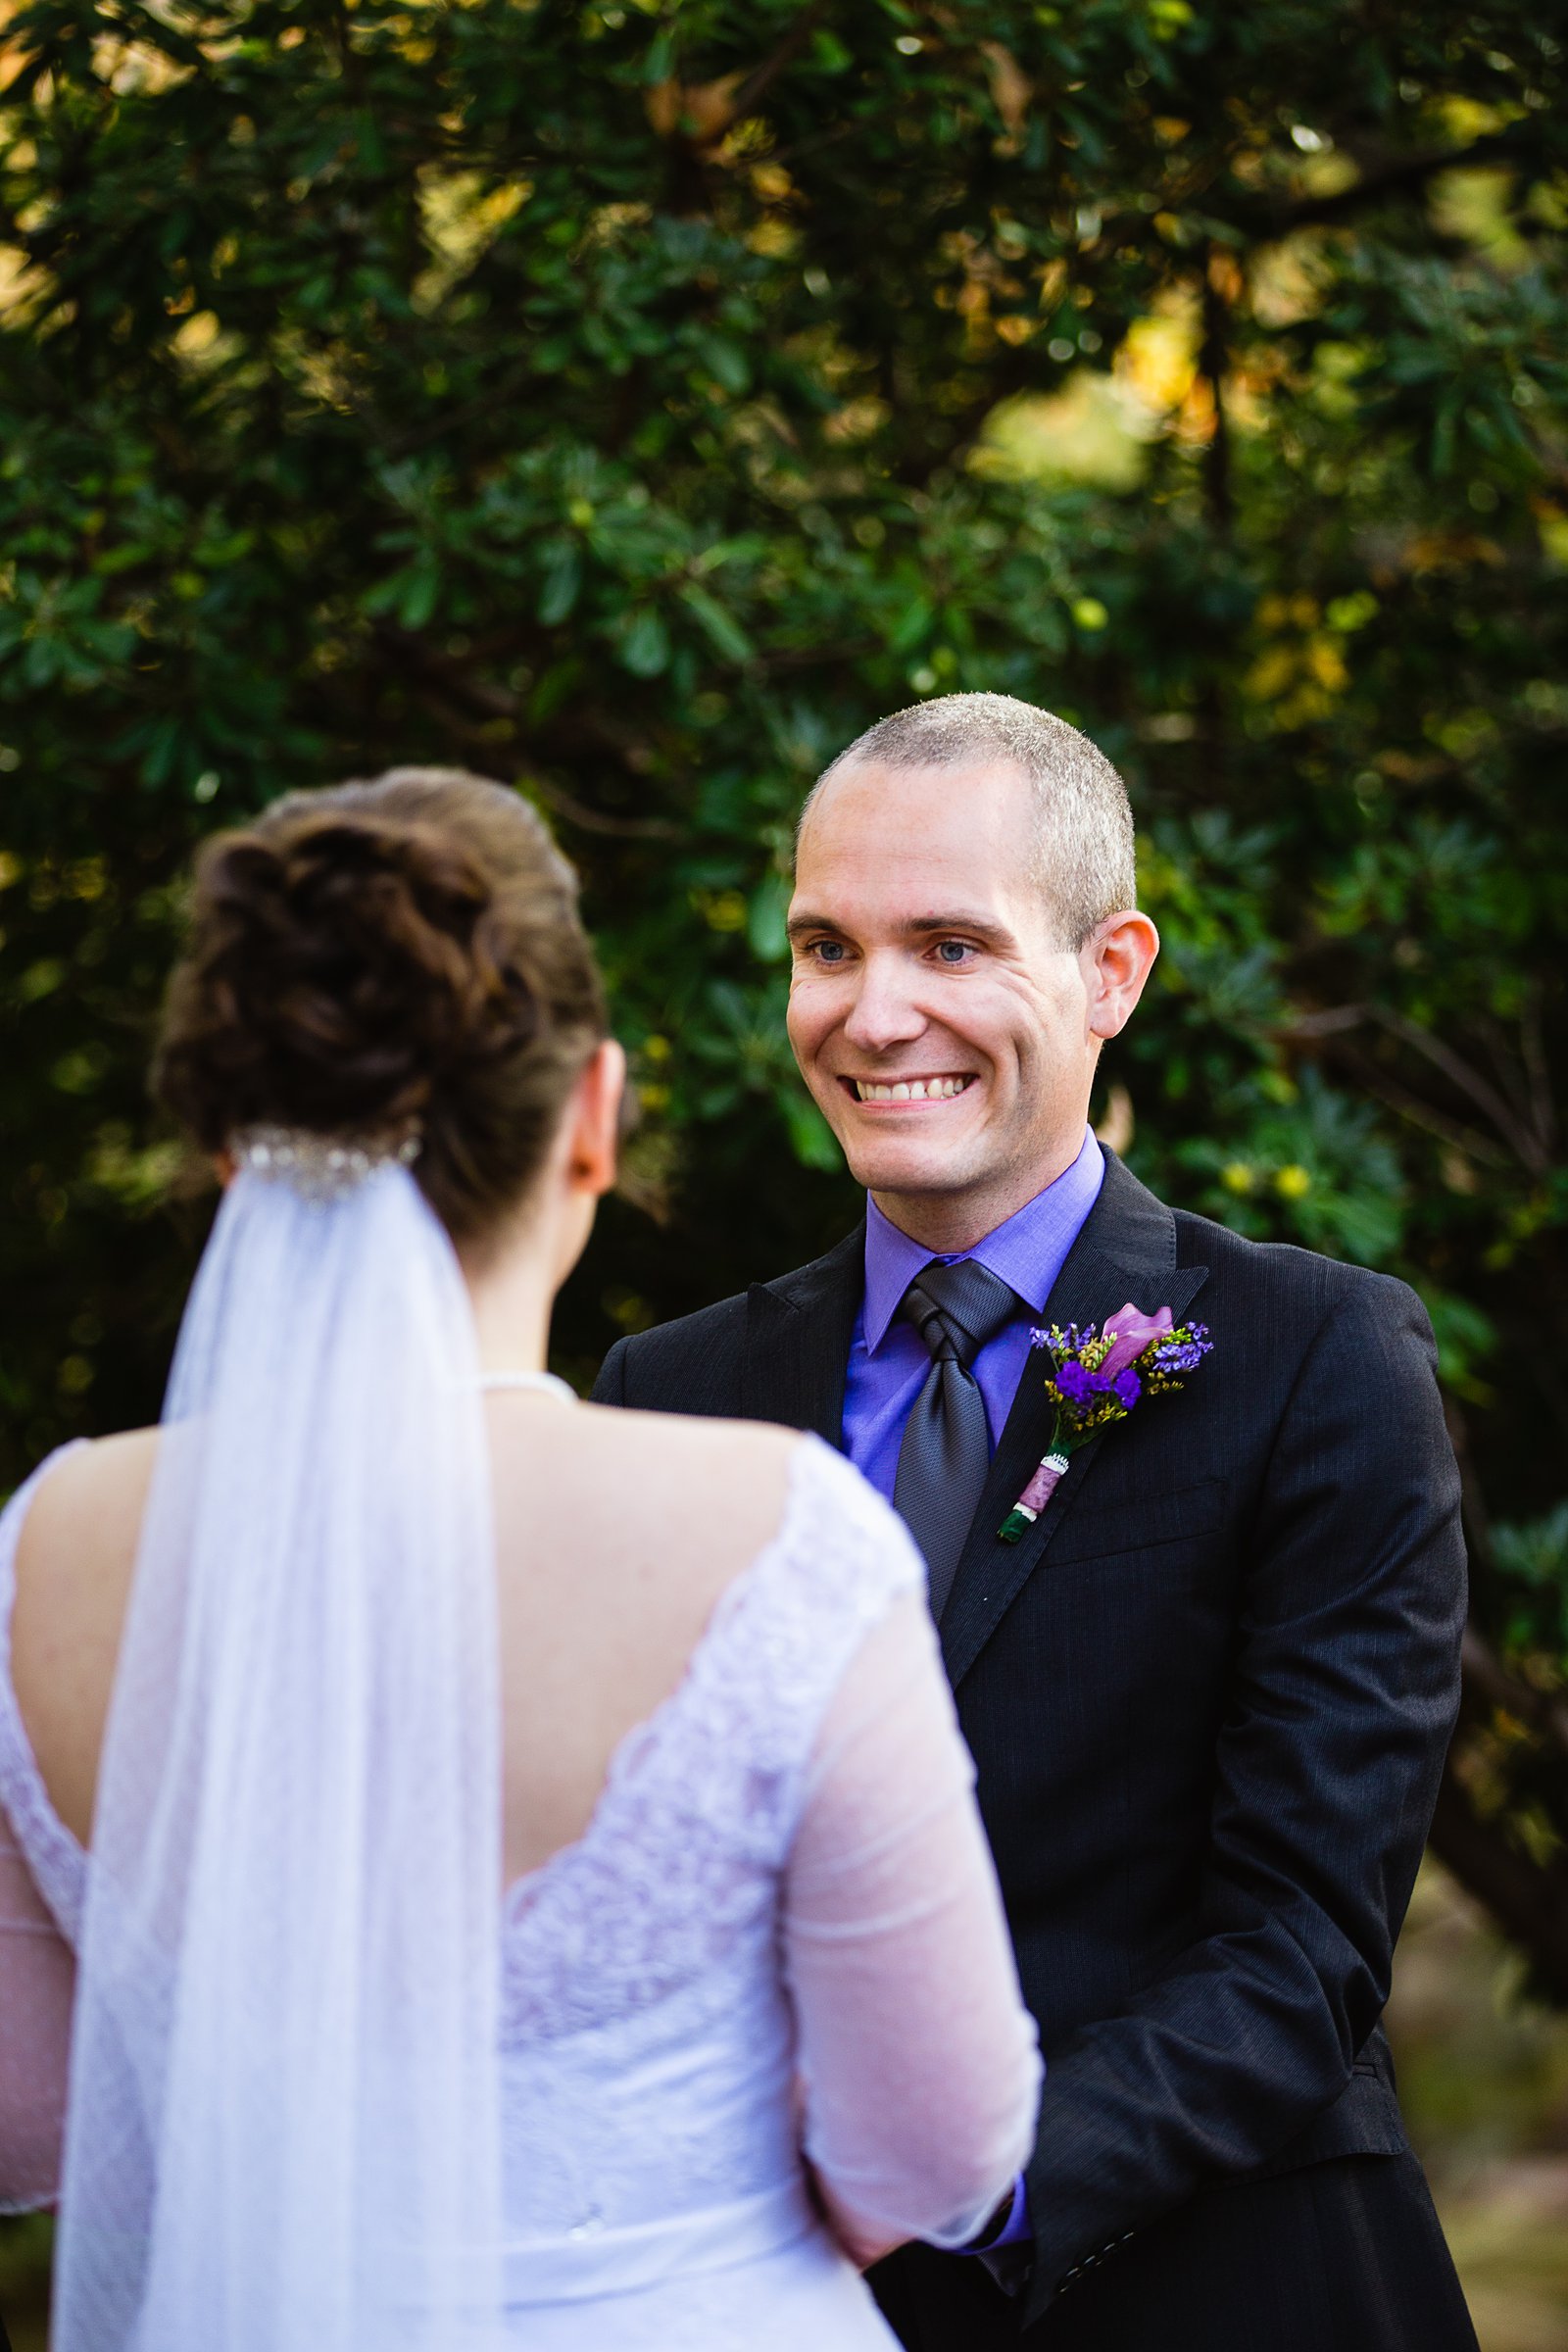 Groom looking at his bride during their wedding ceremony at L'Auberge de Sedona by Sedona wedding photographer PMA Photography.